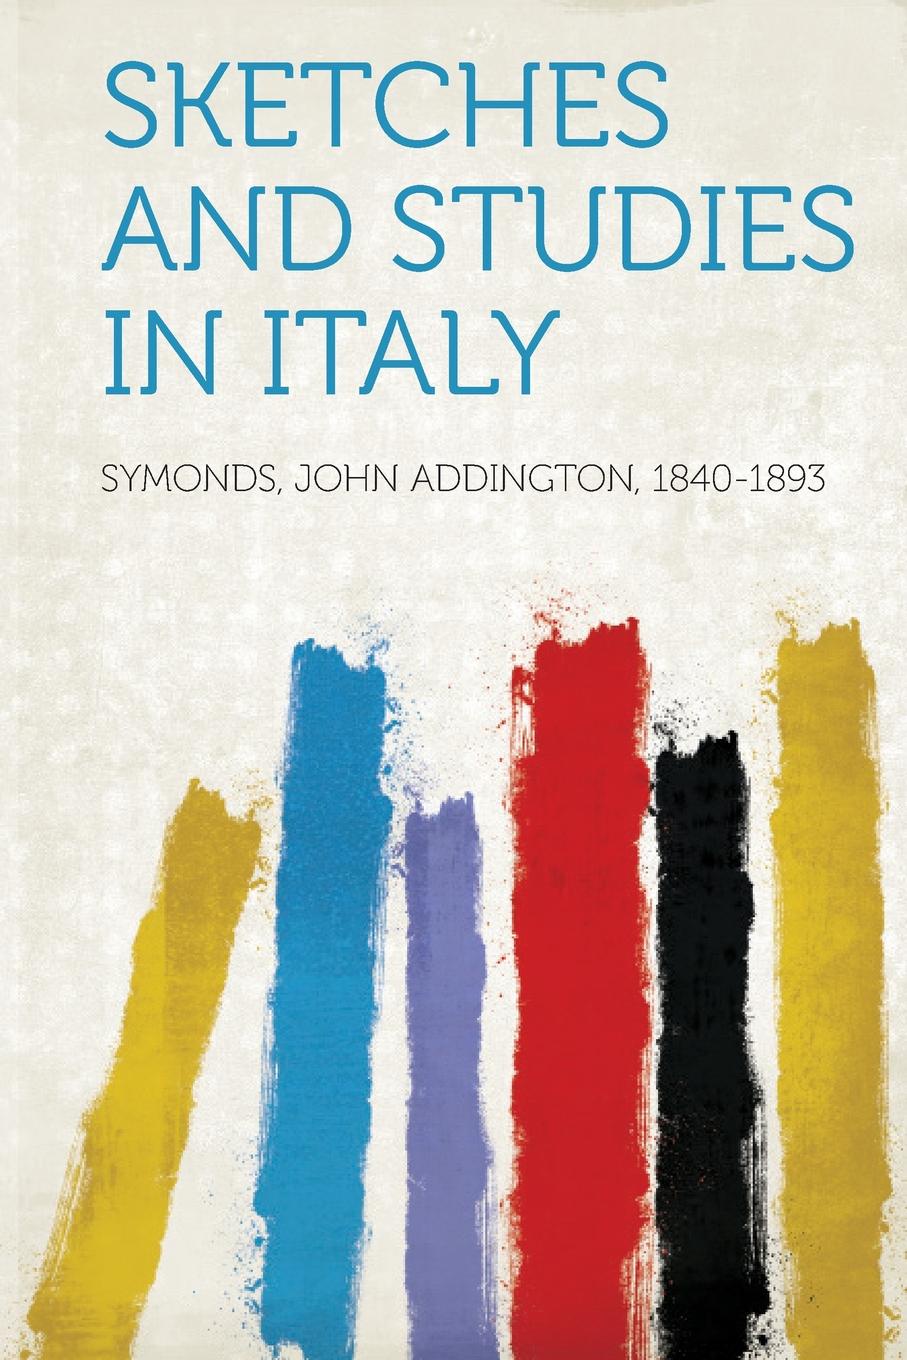 Sketches and Studies in Italy